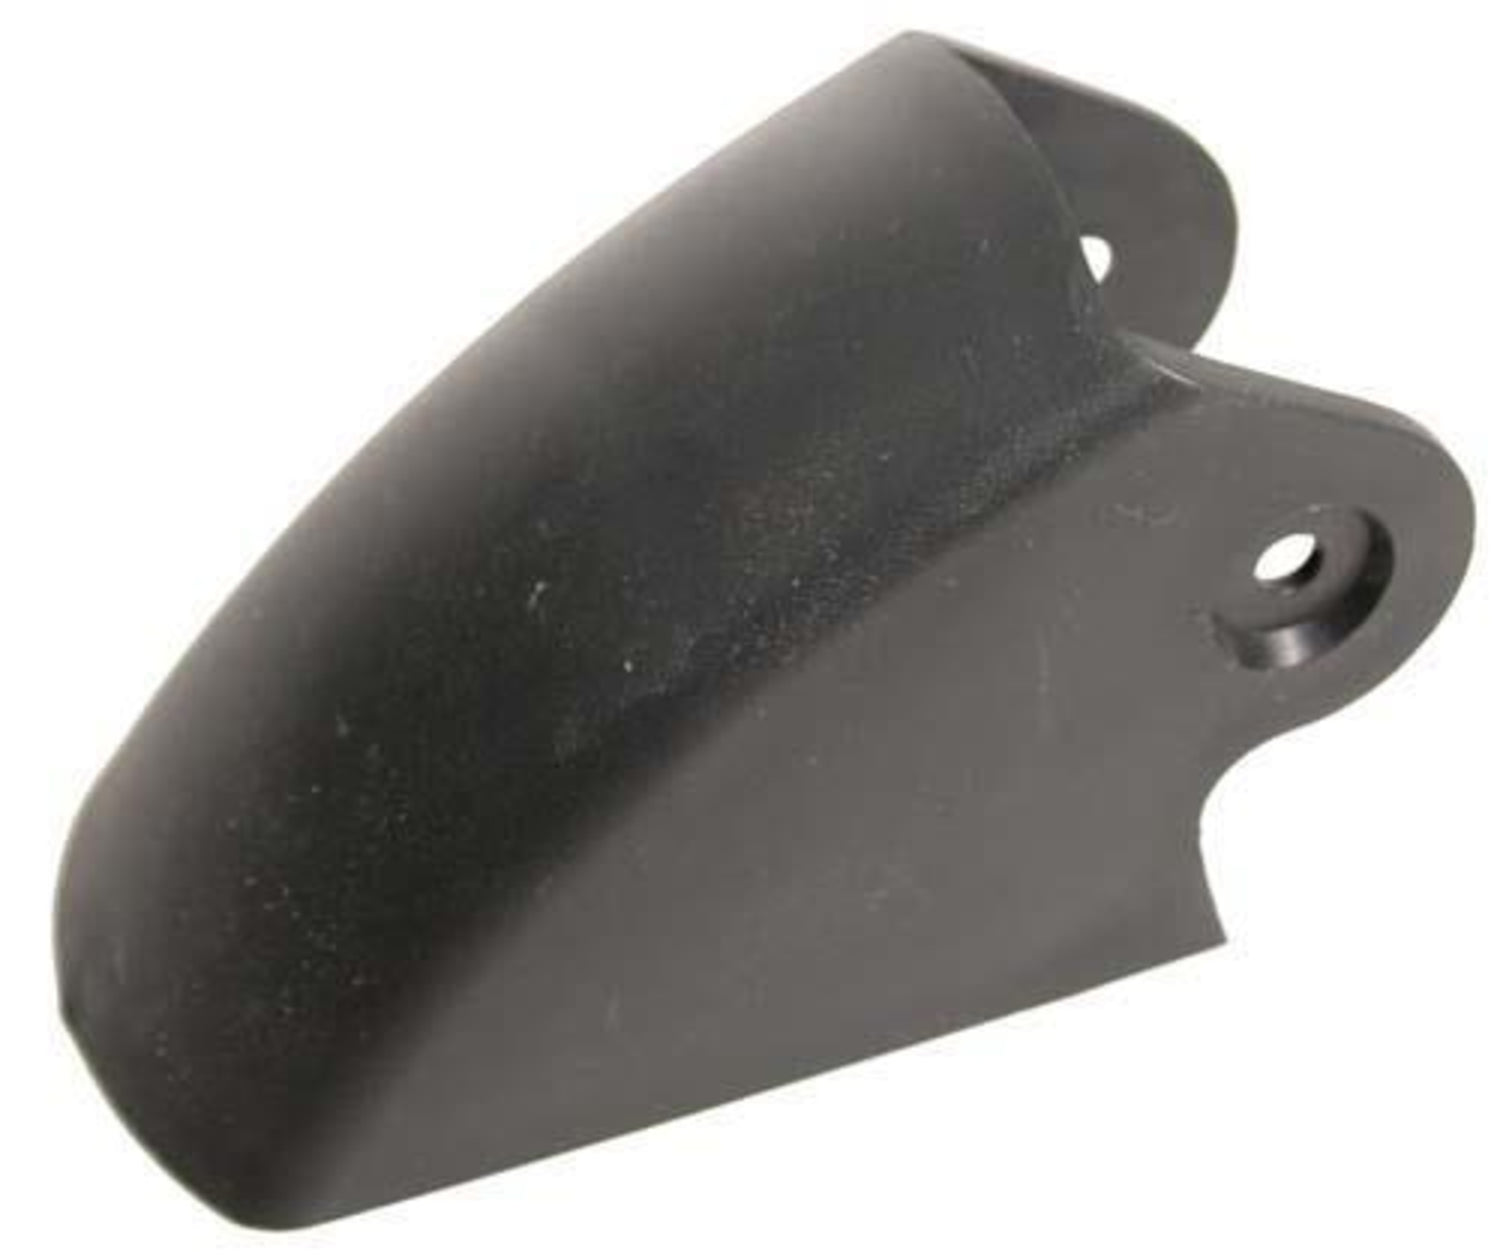 E-Z-GO RXV Brake Pedal Cover (Years 2008-Up)